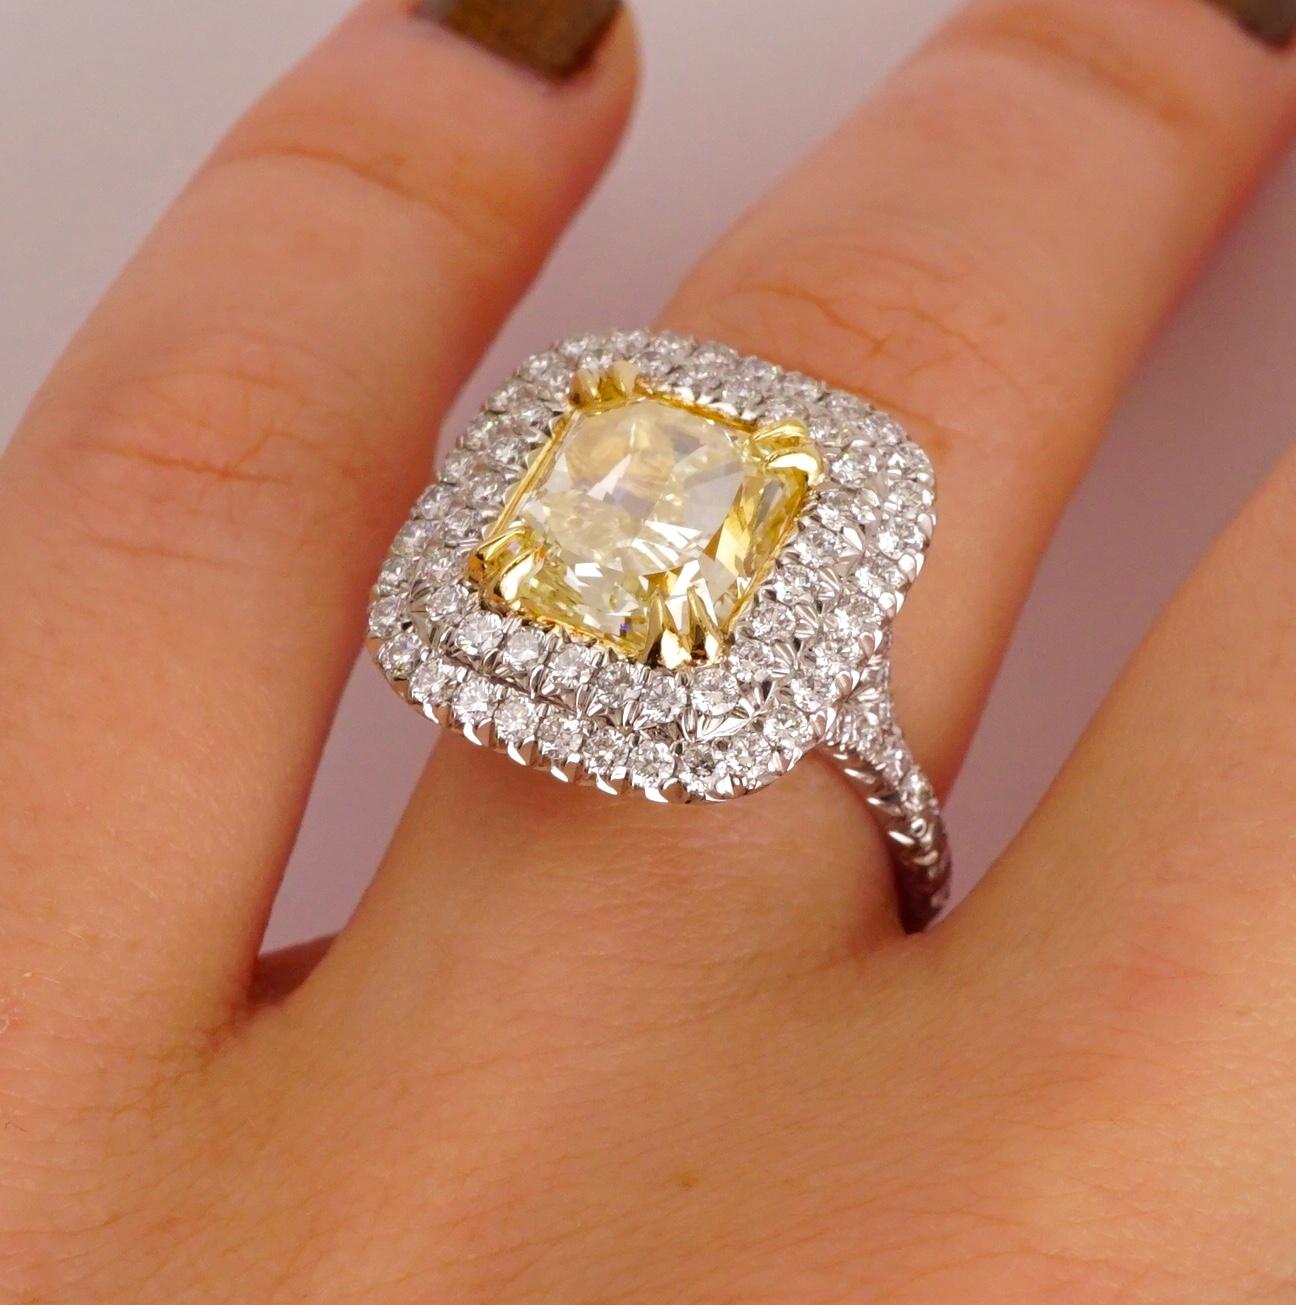 Radiant Cut GIA Certified 3.52 Carat Fancy Yellow Radiant Diamond Engagement Ring